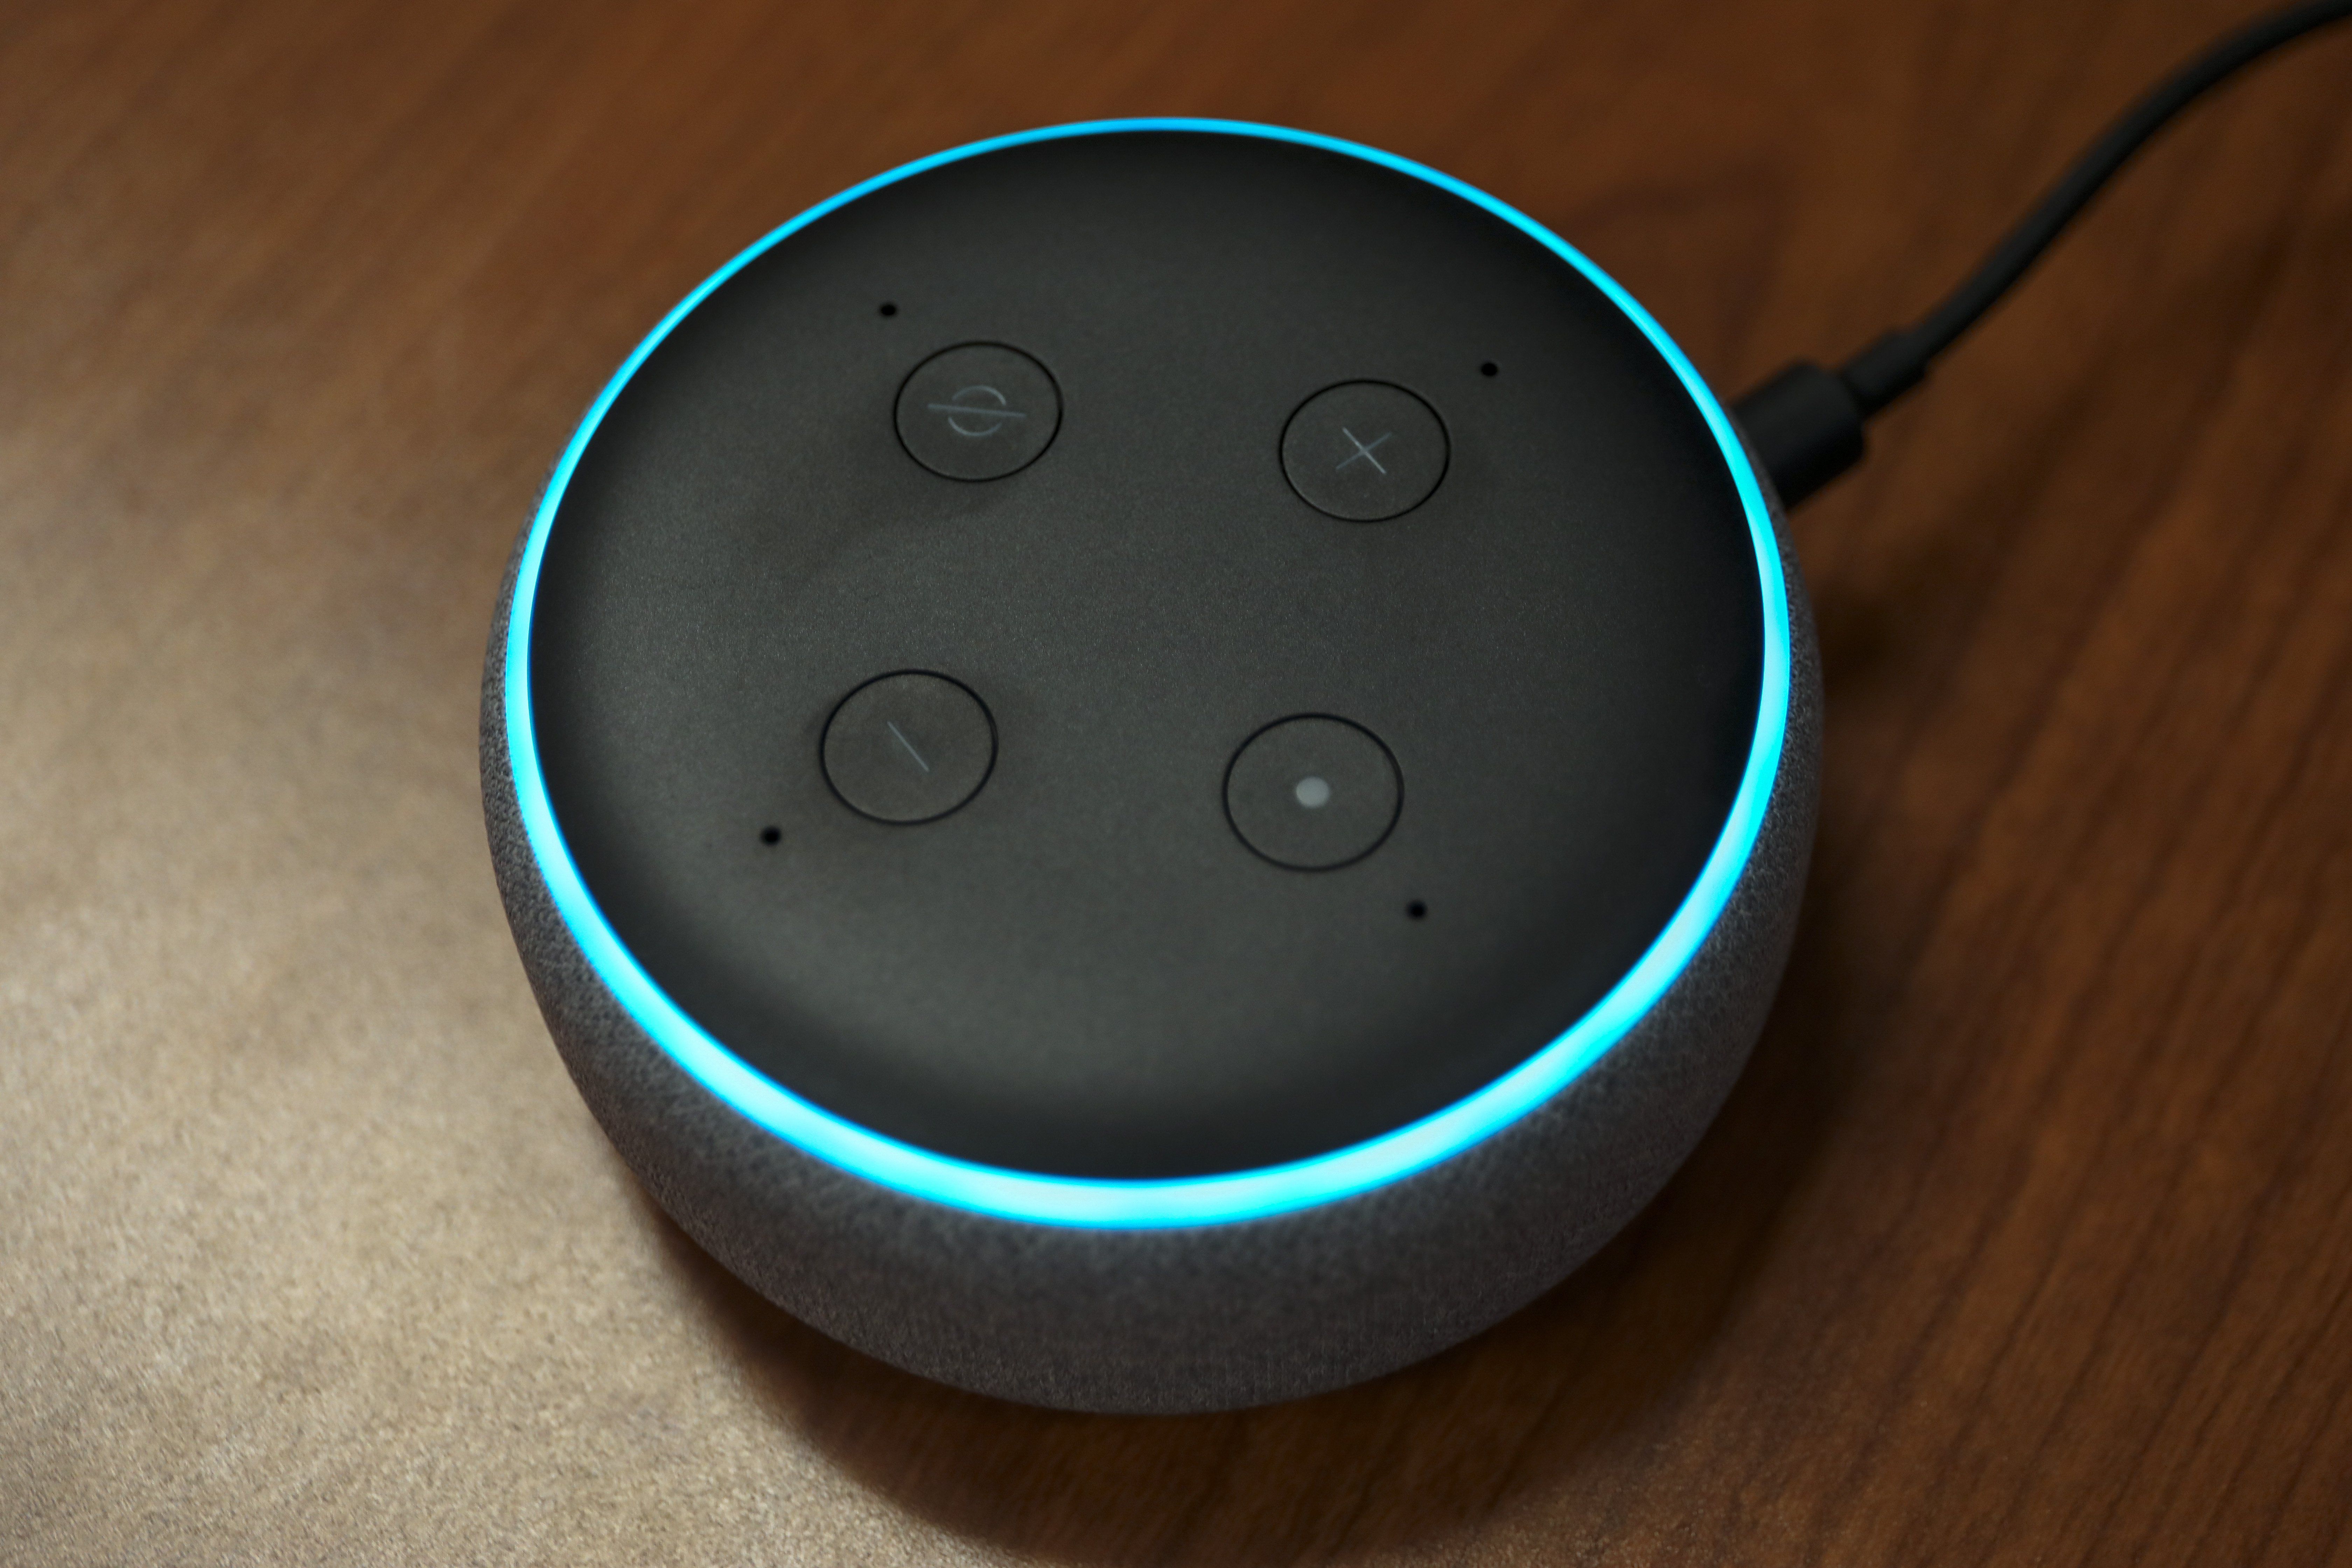 Thinking about selling your Echo Dot—or any IoT device? Read this first